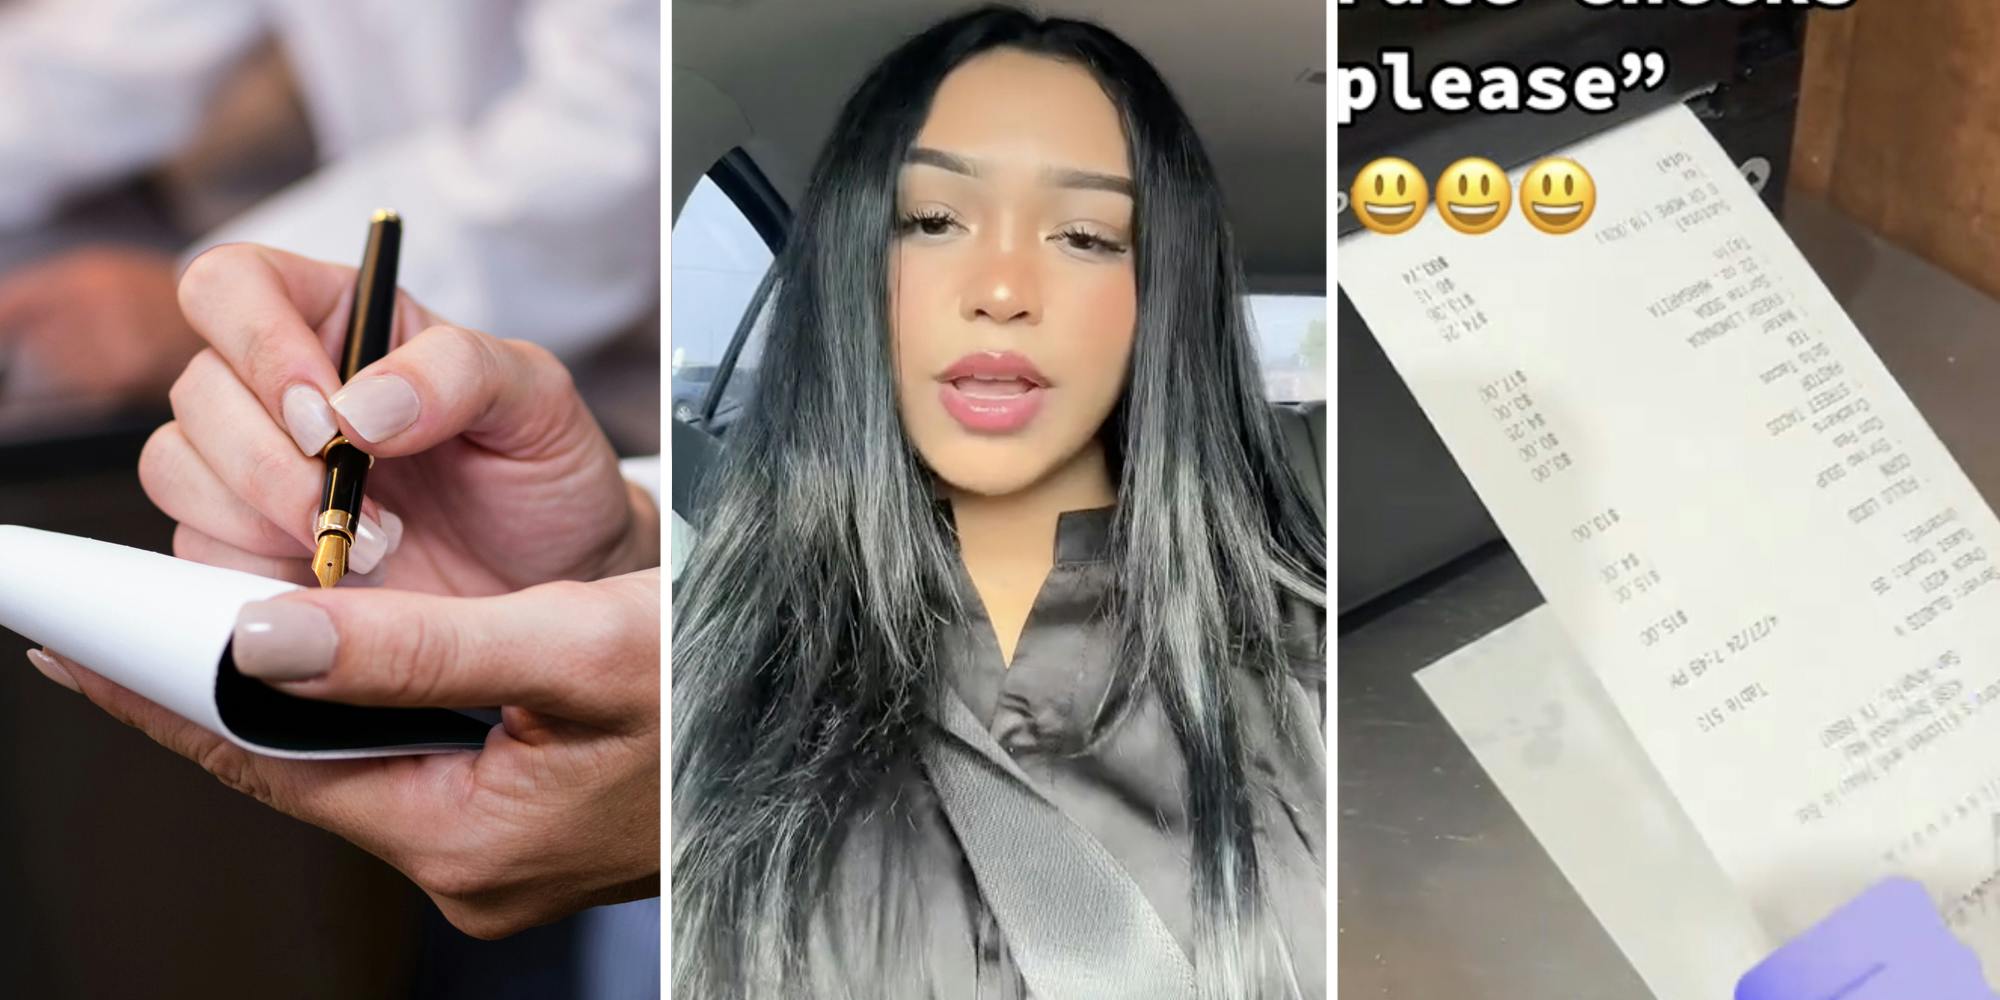 ‘Like yall could’ve paid together then Venmo each other after’: Restaurant server pushed to tears after party of 40 requested separate checks